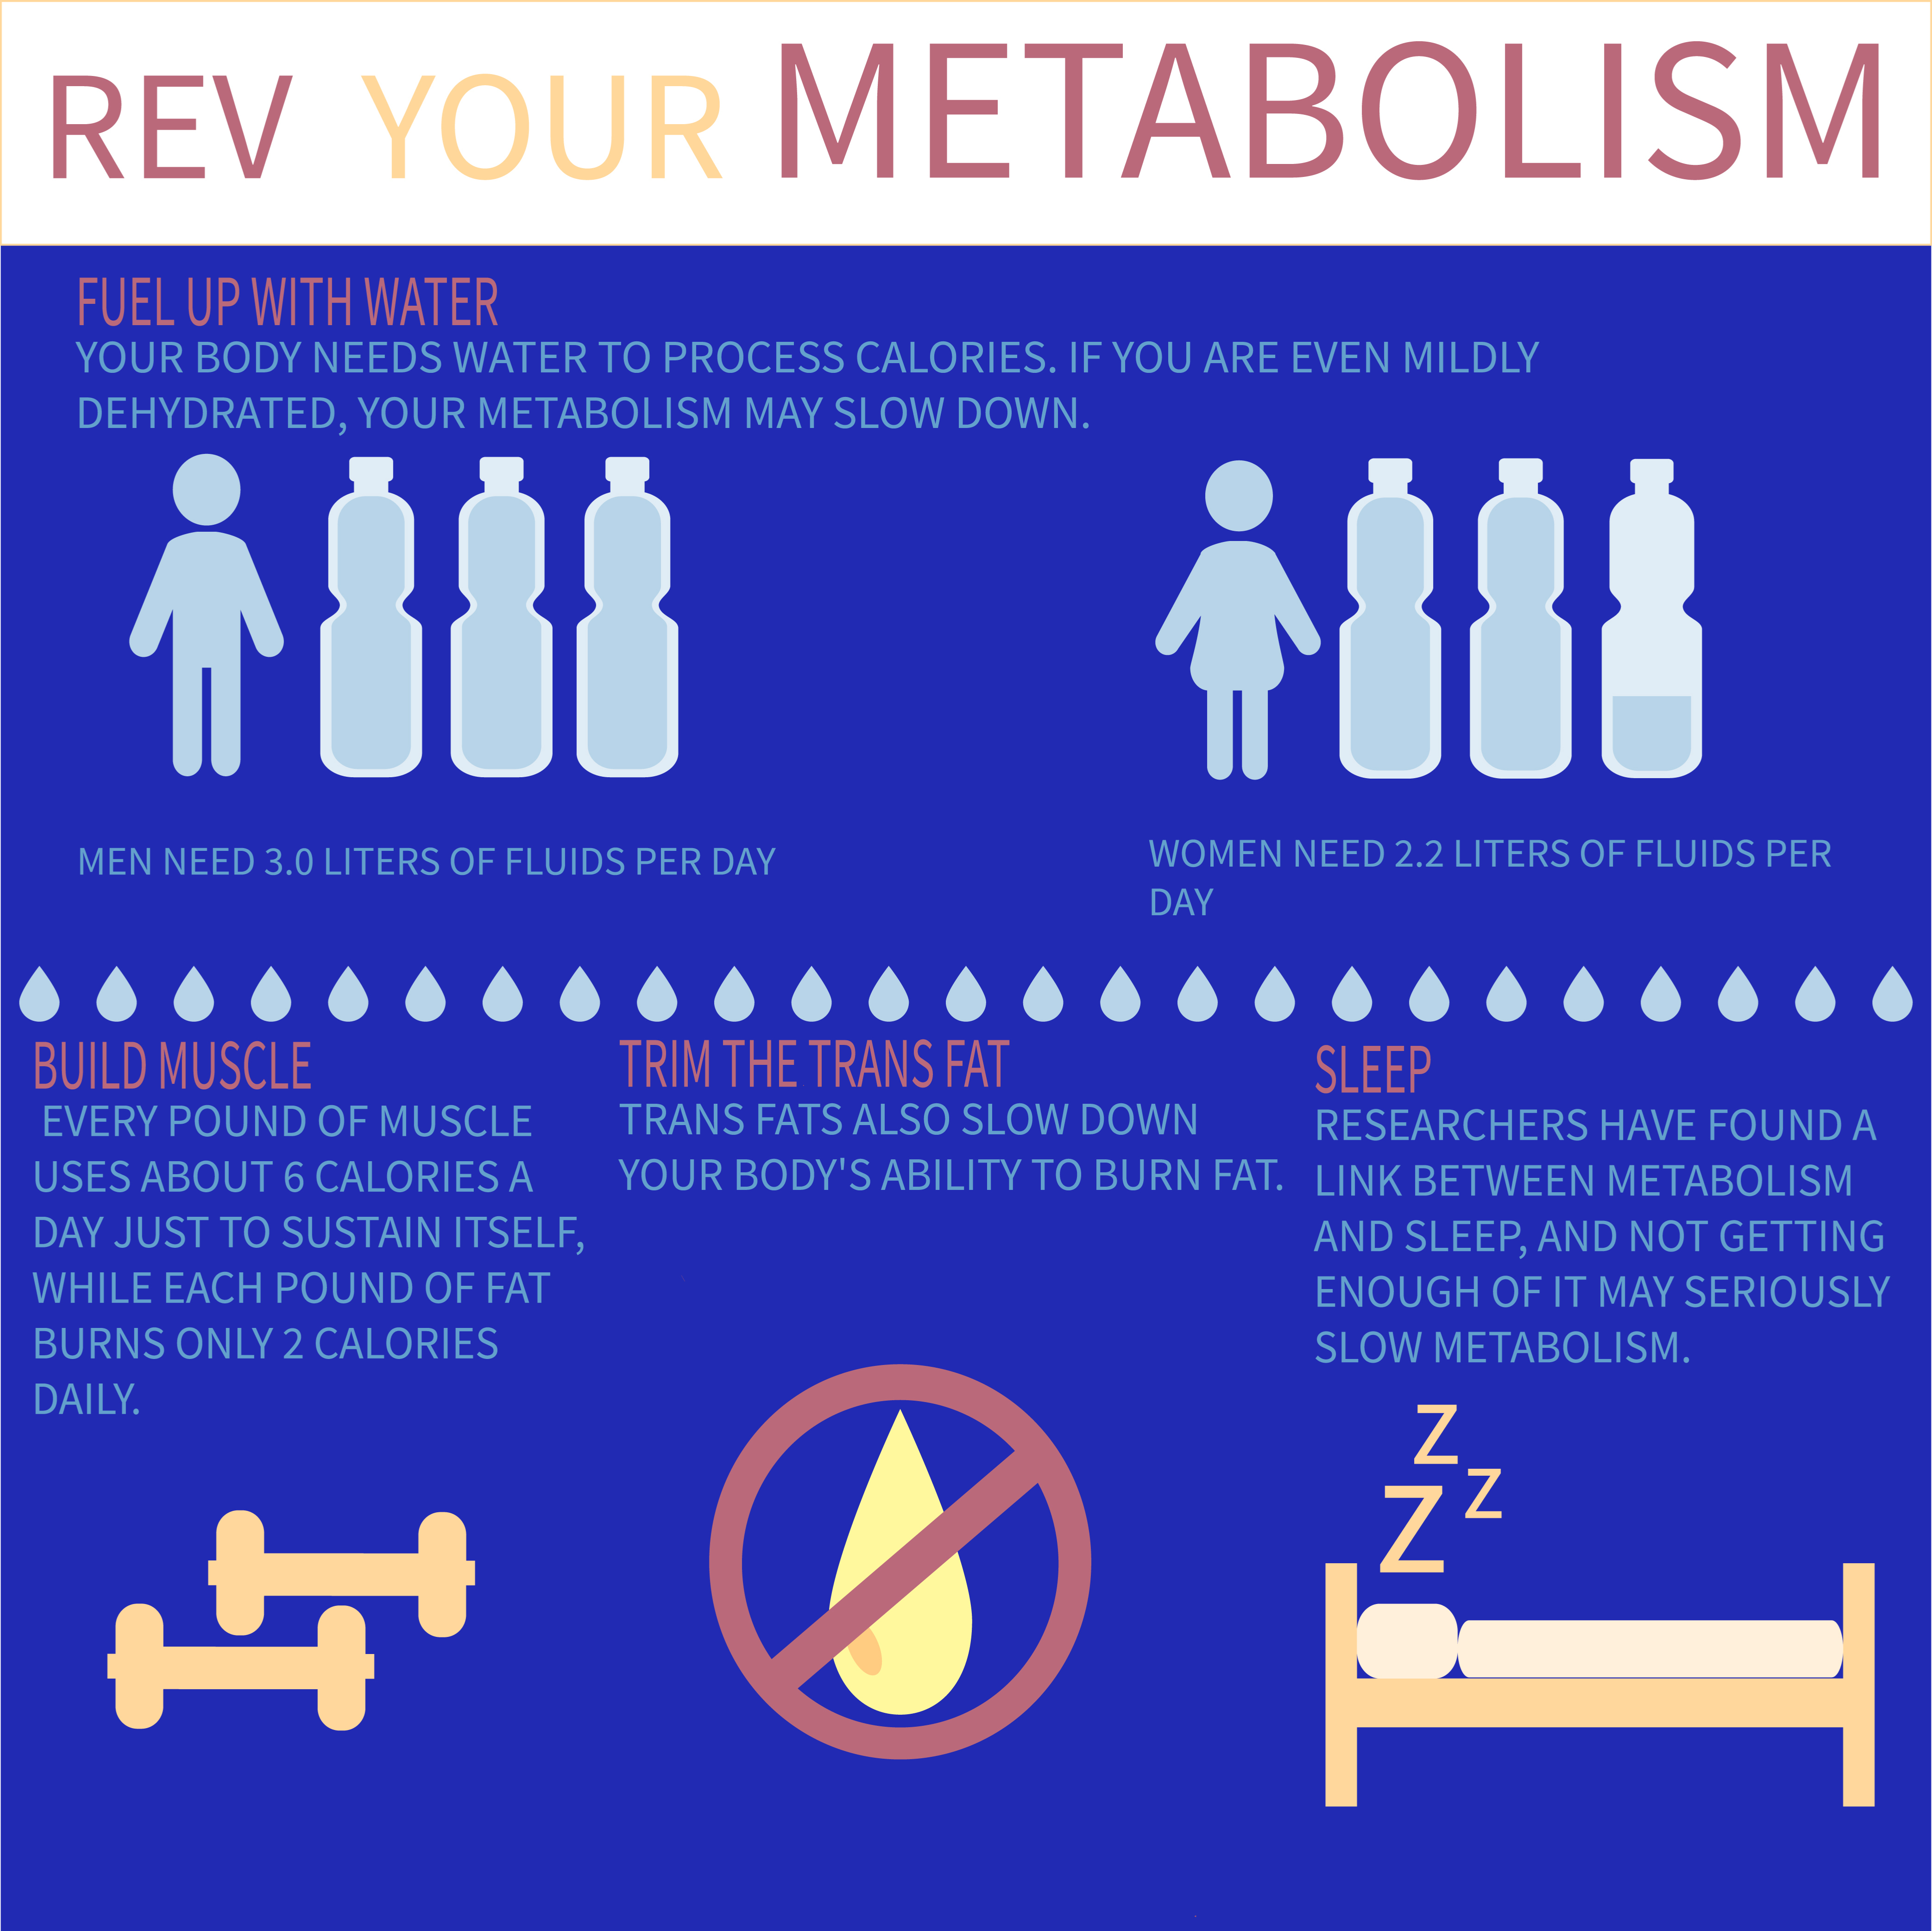 Remember to take care about your metabolism!